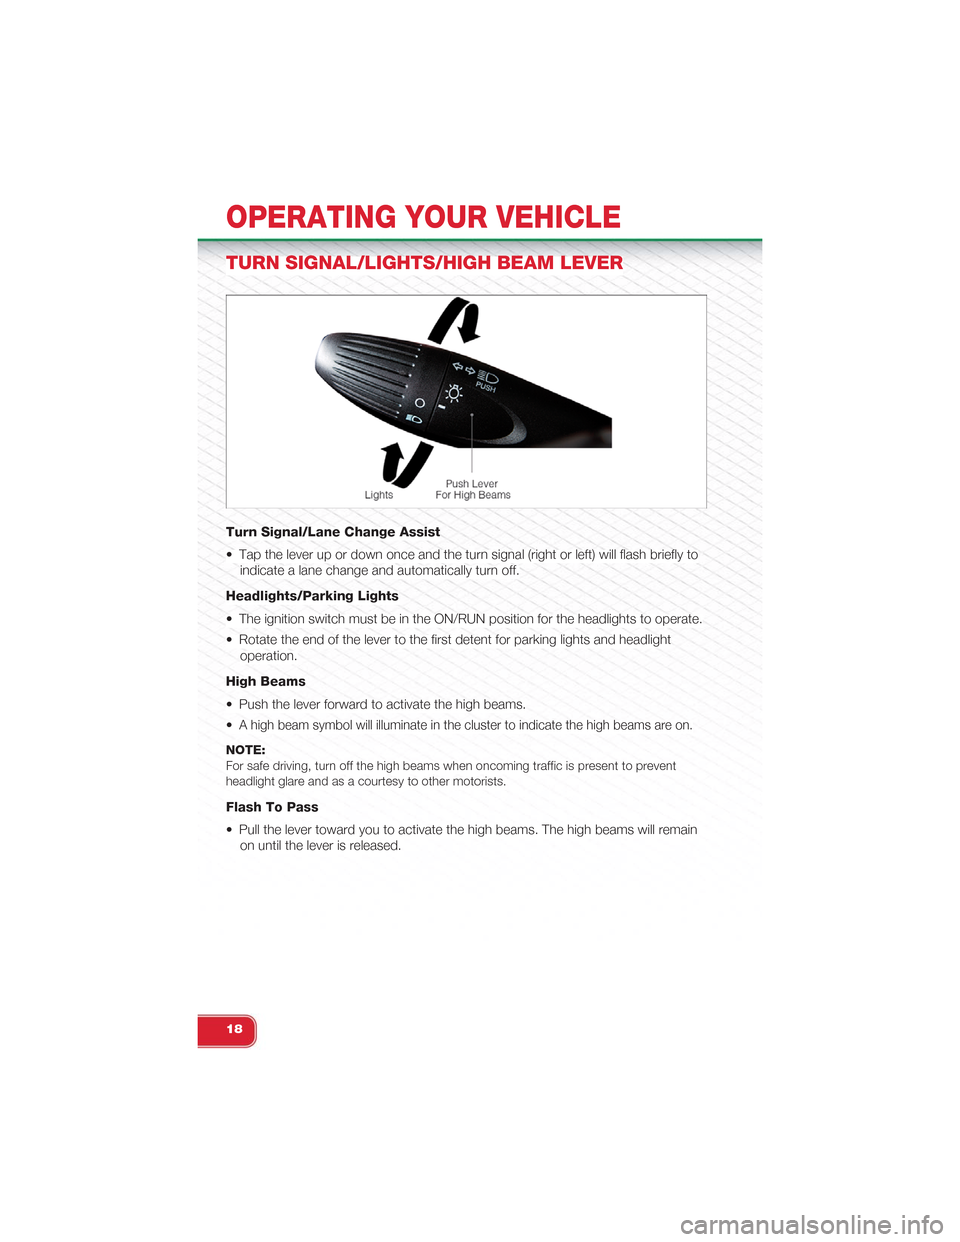 FIAT 500 ABARTH 2013 2.G User Guide TURN SIGNAL/LIGHTS/HIGH BEAM LEVER
Turn Signal/Lane Change Assist
• Tap the lever up or down once and the turn signal (right or left) will flash briefly to
indicate a lane change and automatically t